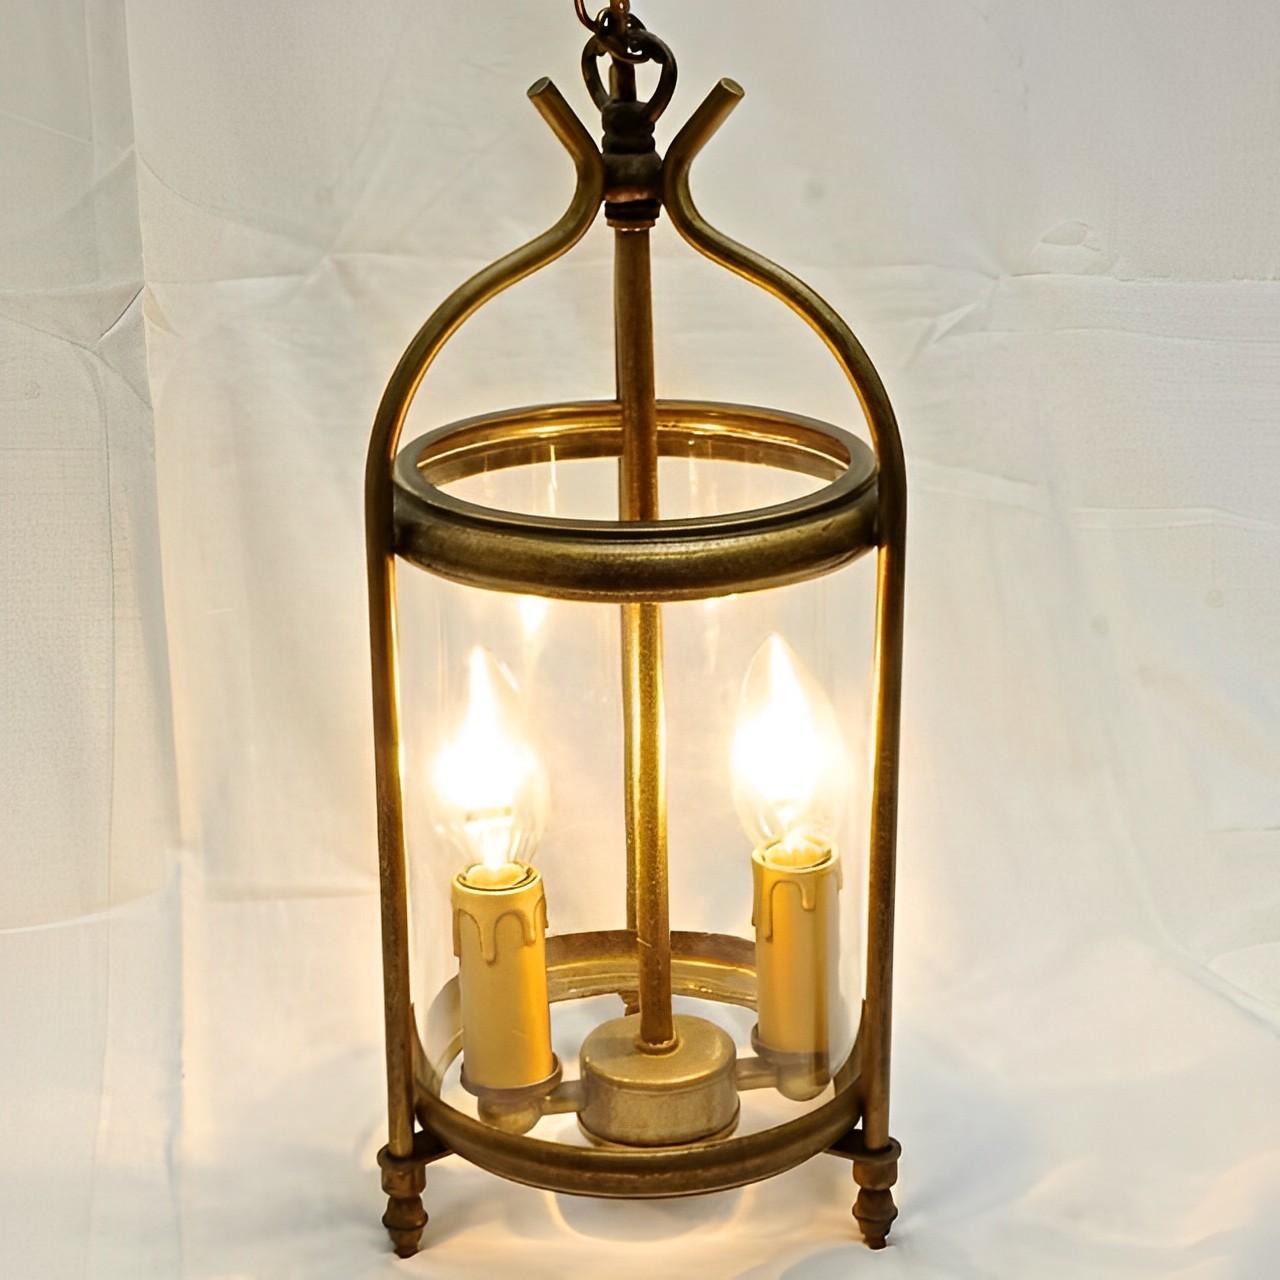 Round glazed two light French brass lantern in a stylish simple design. The glazed part of the lantern is height 24cm / 9.45 inches, and the lantern top is height 11.3cm / 4.45 inches. Diameter 15.1cm / 6 inches. The lantern has been rewired for the